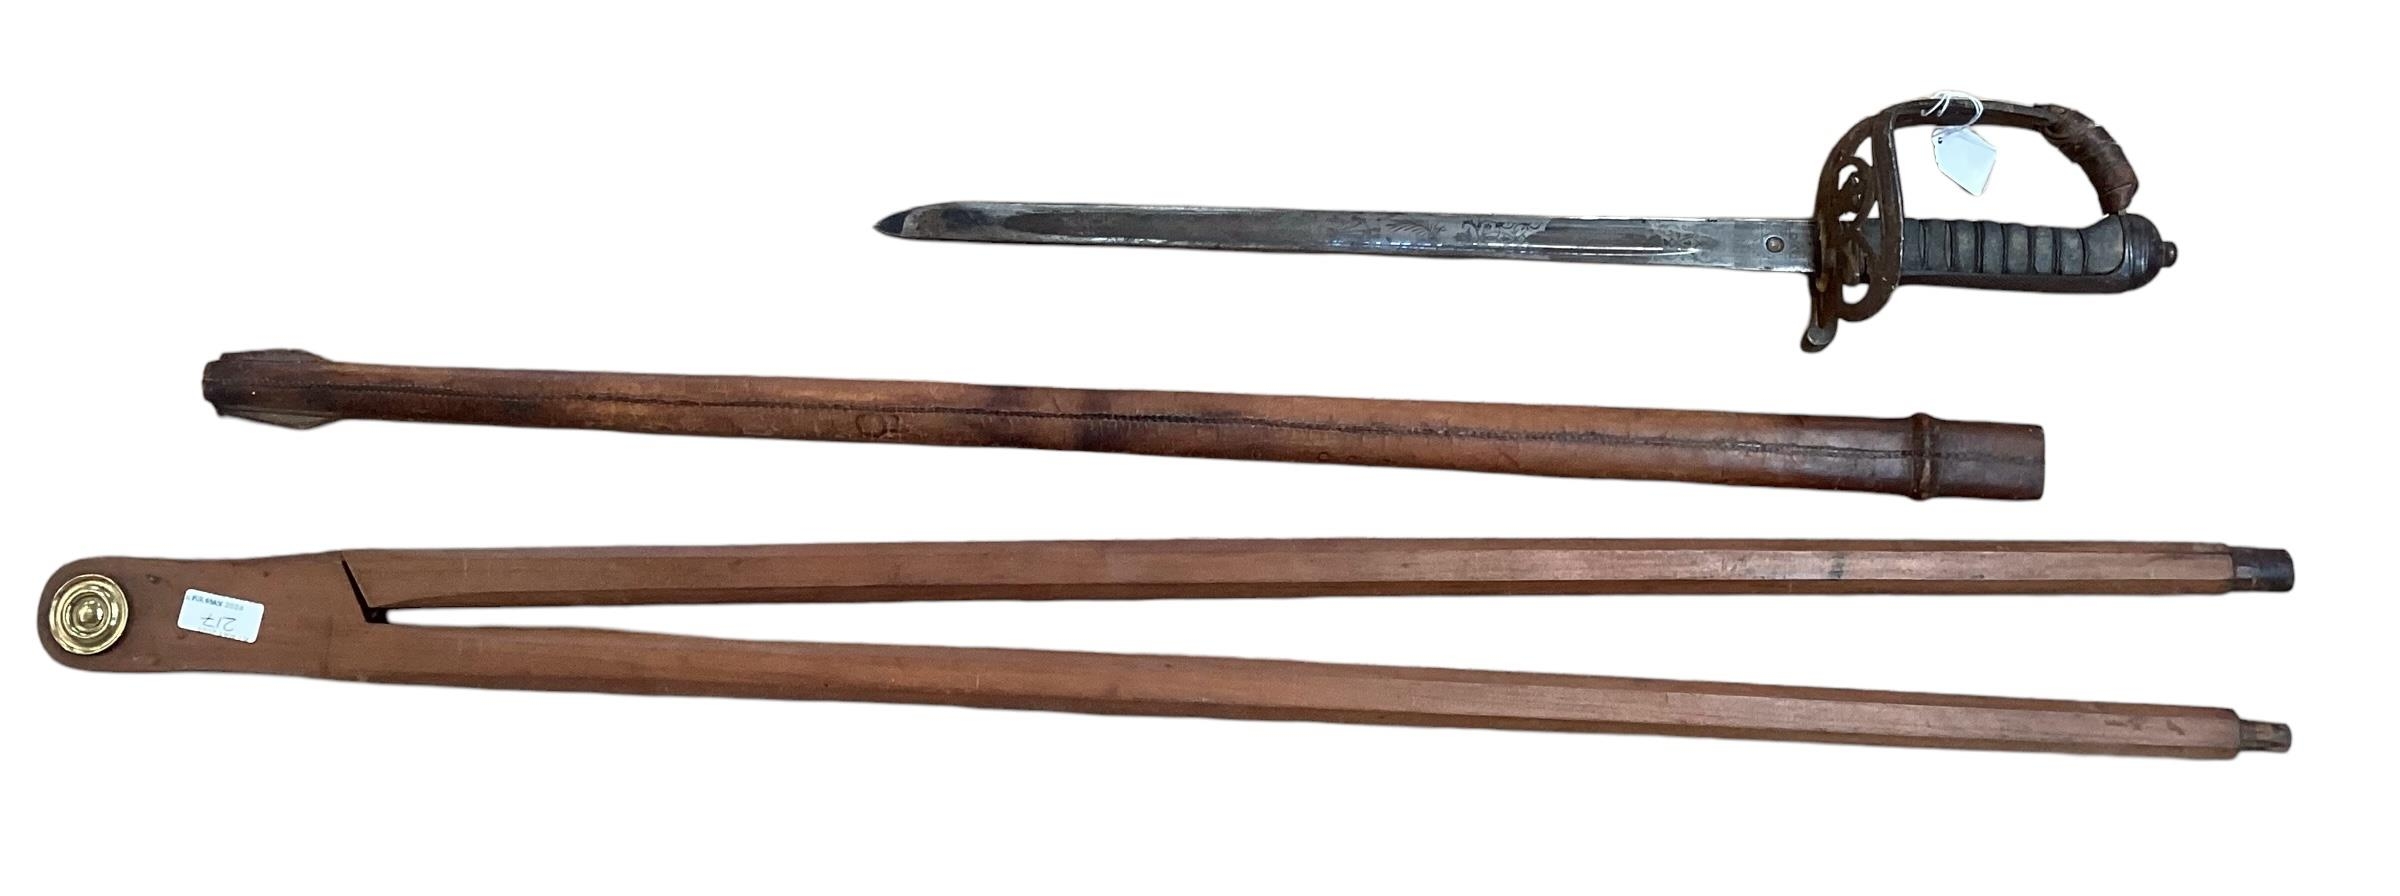 A sword and a measure stick - Image 8 of 8